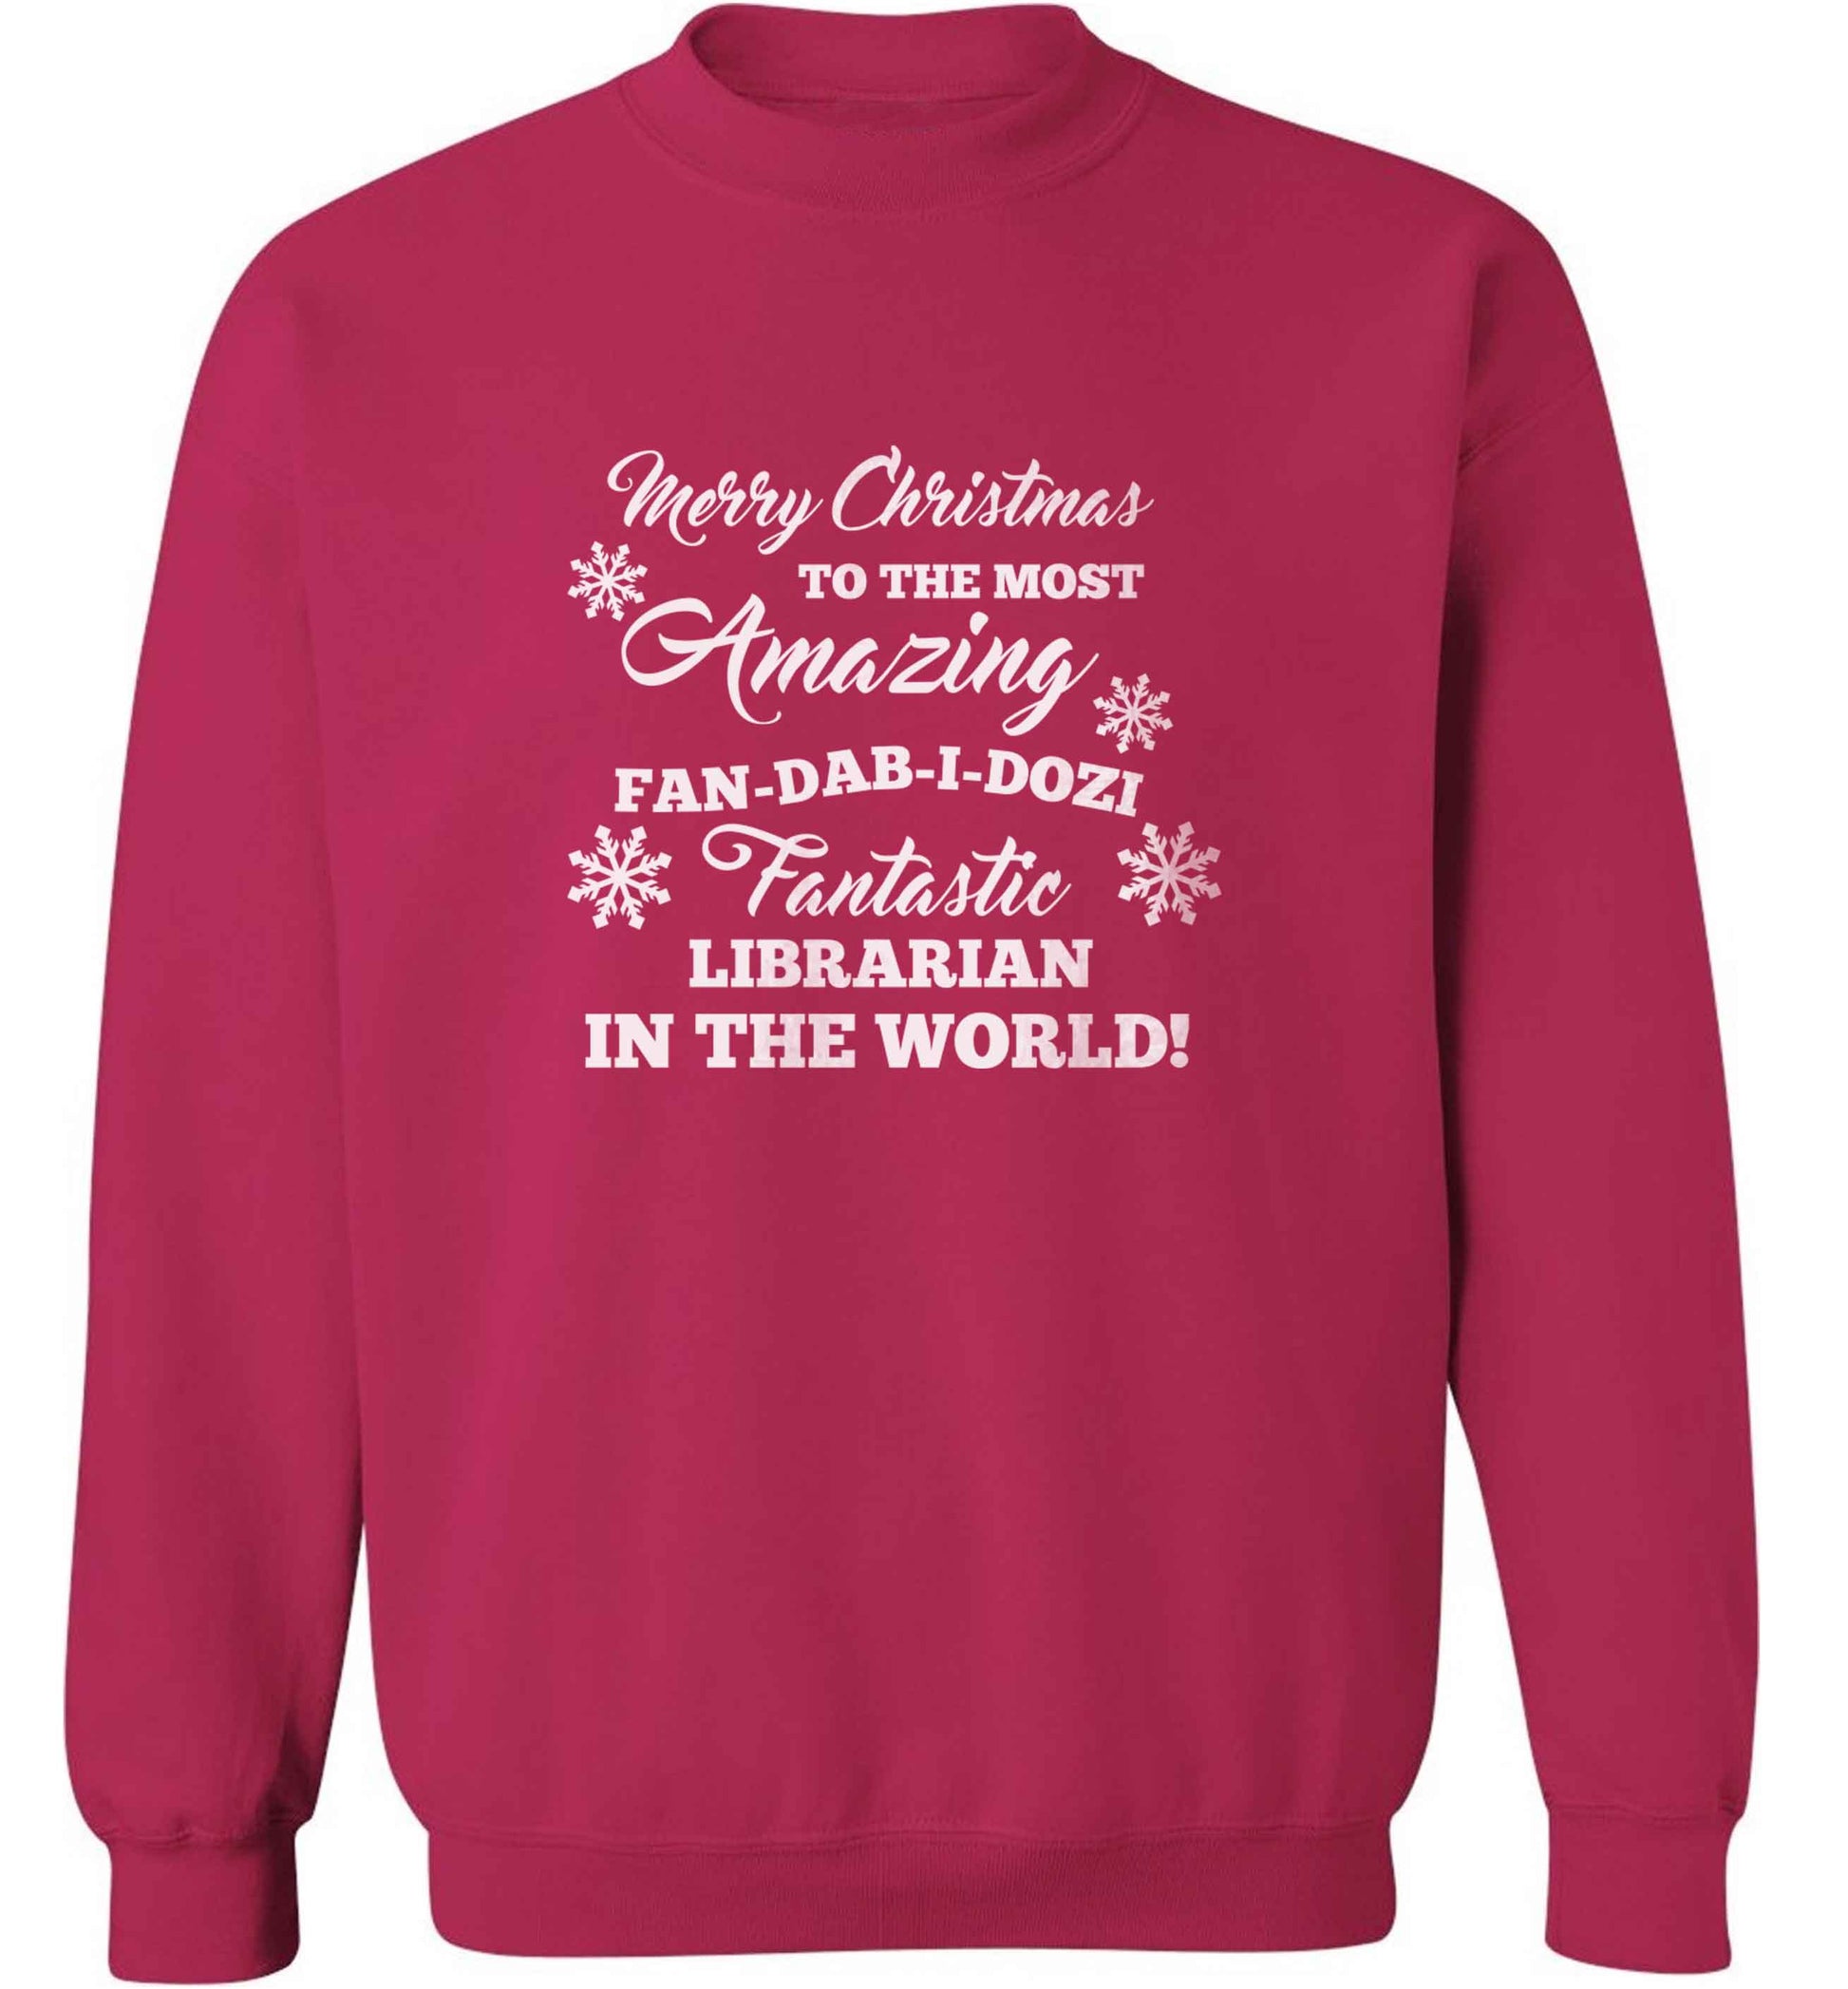 Merry Christmas to the most amazing librarian in the world! adult's unisex pink sweater 2XL